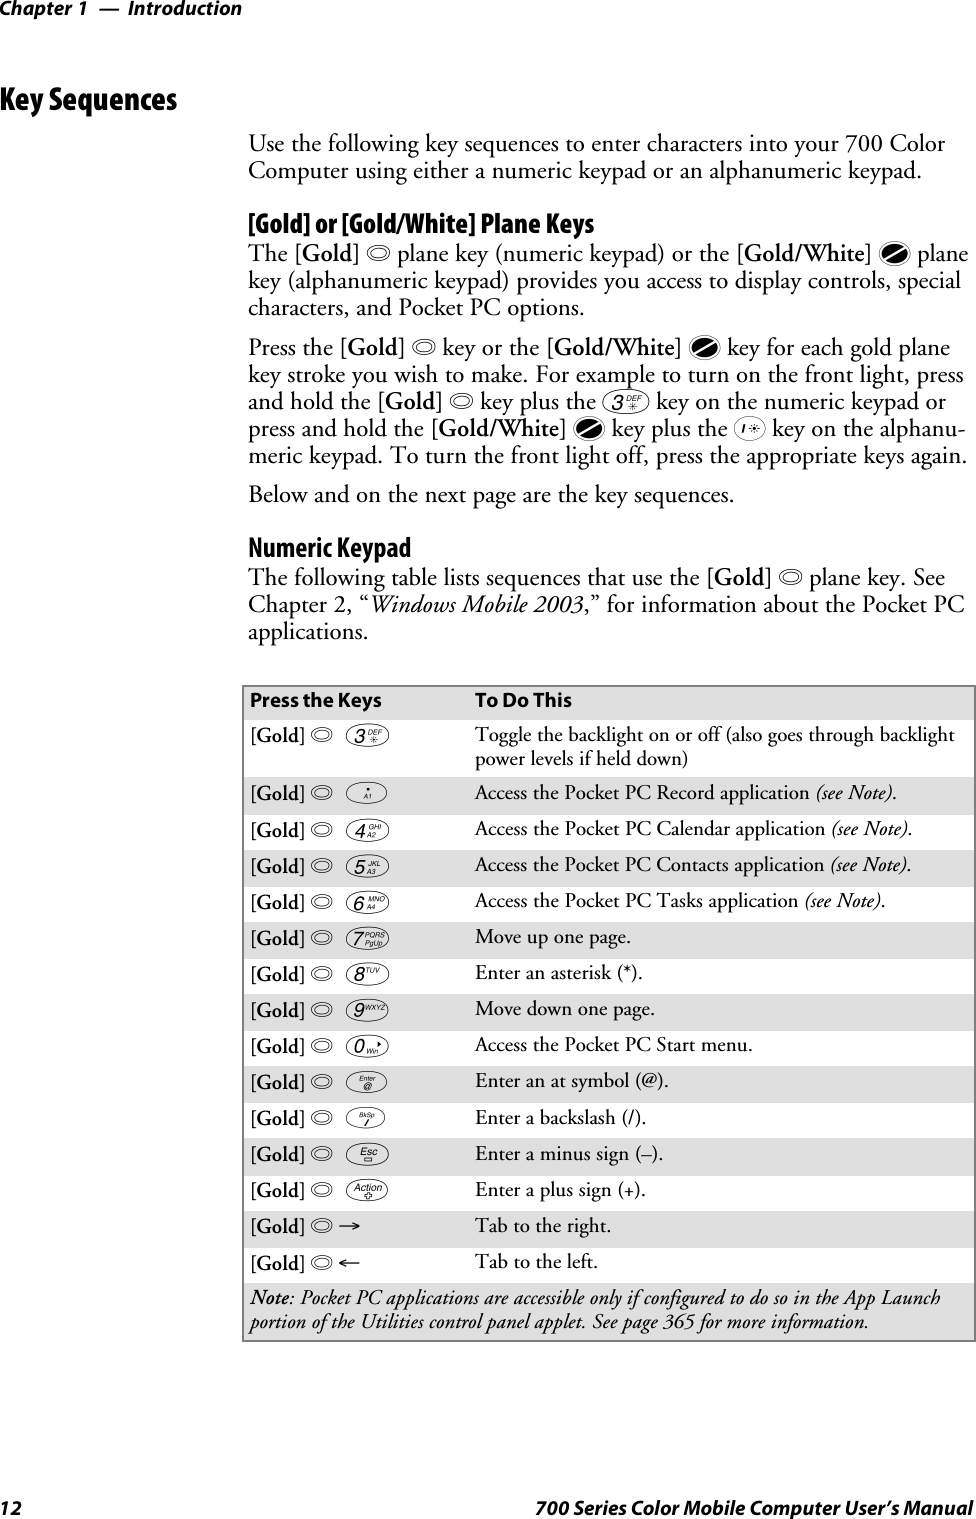 IntroductionChapter —112 700 Series Color Mobile Computer User’s ManualKey SequencesUse the following key sequences to enter characters into your 700 ColorComputer using either a numeric keypad or an alphanumeric keypad.[Gold] or [Gold/White] Plane KeysThe [Gold] bplane key (numeric keypad) or the [Gold/White] cplanekey (alphanumeric keypad) provides you access to display controls, specialcharacters, and Pocket PC options.Press the [Gold] bkey or the [Gold/White] ckey for each gold planekey stroke you wish to make. For example to turn on the front light, pressandholdthe[Gold] bkey plus the 3key on the numeric keypad orpress and hold the [Gold/White] ckey plus the Ikey on the alphanu-meric keypad. To turn the front light off, press the appropriate keys again.Belowandonthenextpagearethekeysequences.Numeric KeypadThe following table lists sequences that use the [Gold] bplane key. SeeChapter 2, “Windows Mobile 2003,” for information about the Pocket PCapplications.Press the Keys To Do This[Gold]b3Toggle the backlight on or off (also goes through backlightpower levels if held down)[Gold]baAccess the Pocket PC Record application (see Note).[Gold]b4Access the Pocket PC Calendar application (see Note).[Gold]b5Access the Pocket PC Contacts application (see Note).[Gold]b6Access the Pocket PC Tasks application (see Note).[Gold]b7Move up one page.[Gold]b8Enter an asterisk (*).[Gold]b9Move down one page.[Gold]b0Access the Pocket PC Start menu.[Gold]beEnter an at symbol (@).[Gold]bKEnter a backslash (/).[Gold]bEEnter a minus sign (–).[Gold]bAEnter a plus sign (+).[Gold]b→Tab to the right.[Gold]b←Tab to the left.Note: Pocket PC applications are accessible only if configured to do so in the App Launchportion of the Utilities control panel applet. See page 365 for more information.